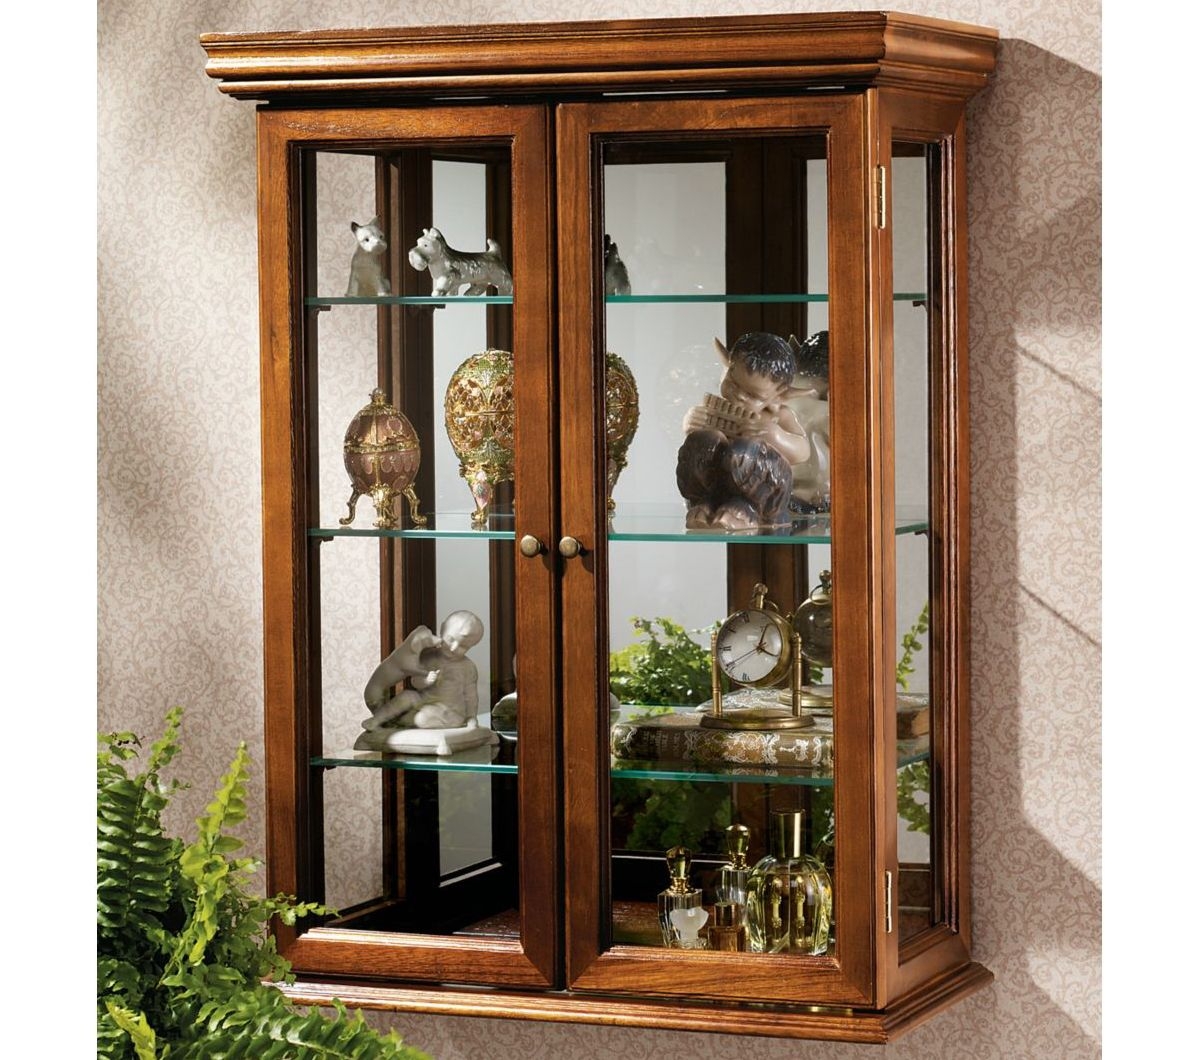 New Hanging Curio Glass Mirrored Display Collectibles Country Shelf Case Cabinet